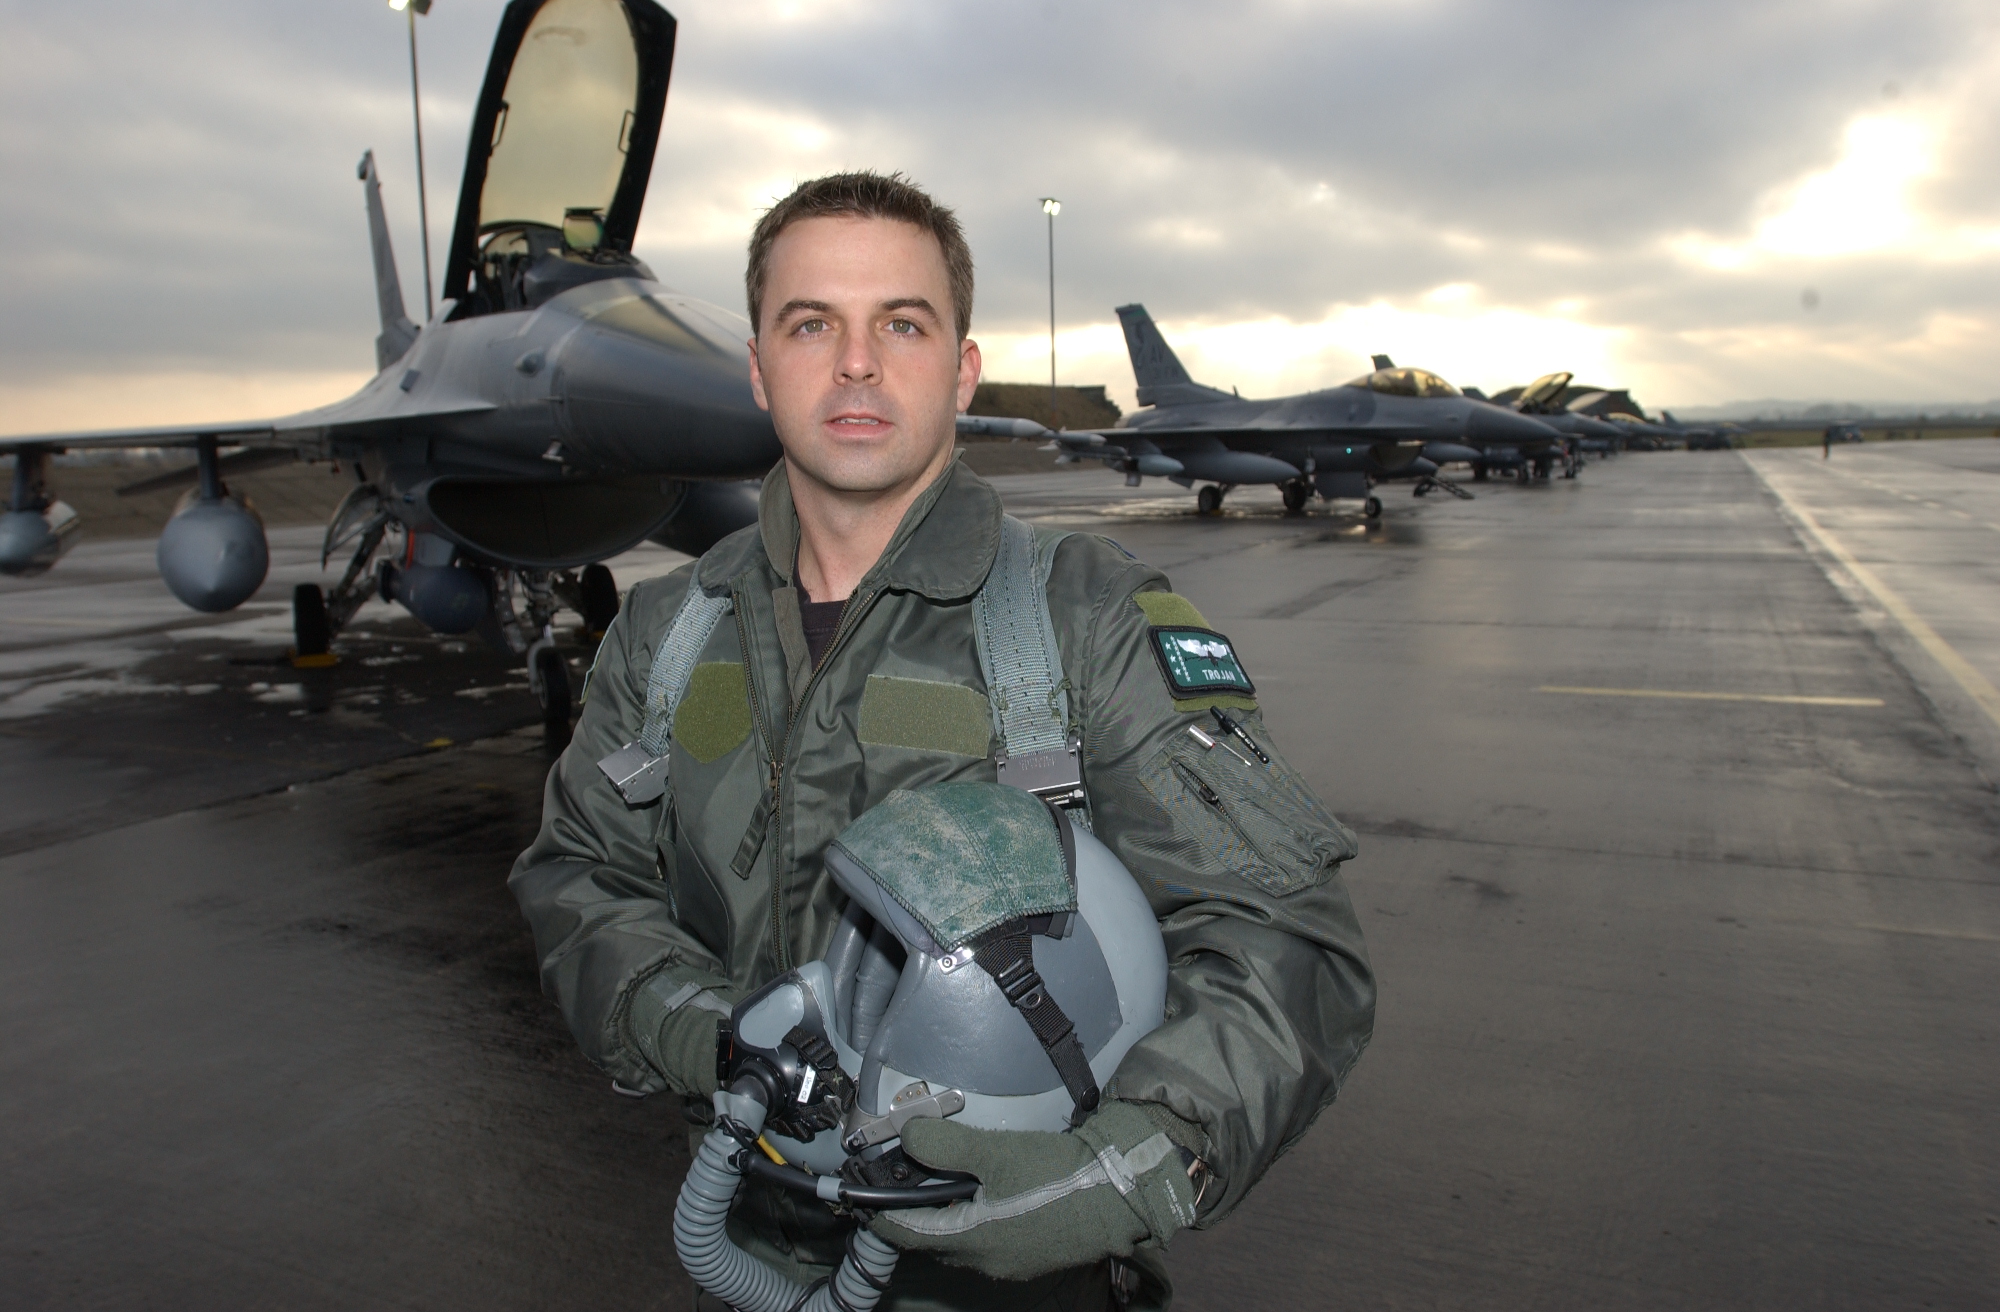 Troy Gilbert in 2002 on the flight line at Incirlik air base, Turkey, where he was helping enforce the no-fly zone over northern Iraq (Courtesy of Rhonda Jimmerson)